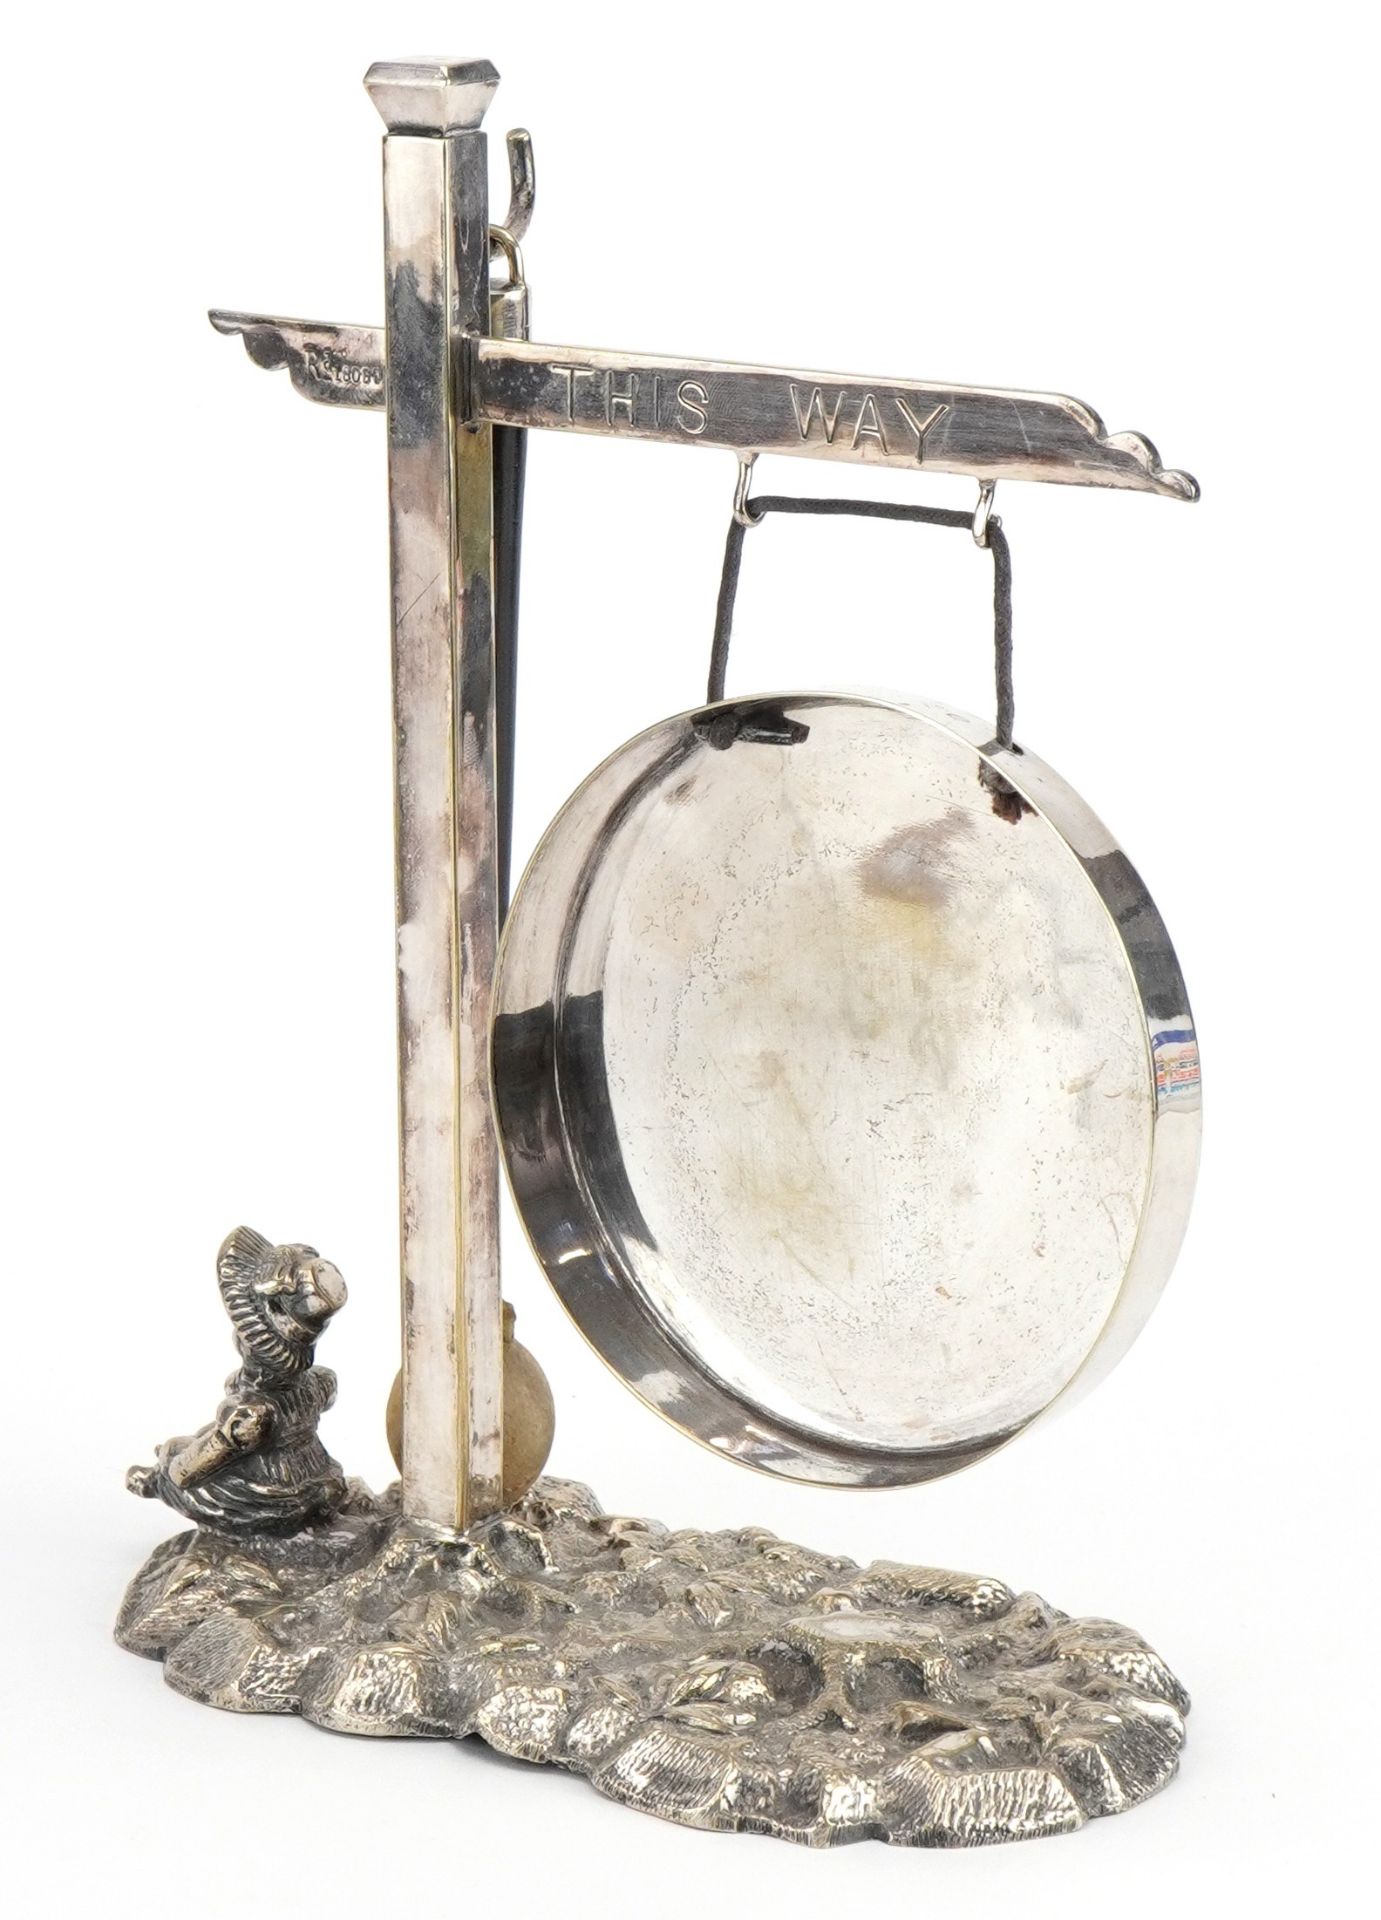 Victorian silver plated gong in the form of a This Way road sign, registered design number 16060, - Image 3 of 4